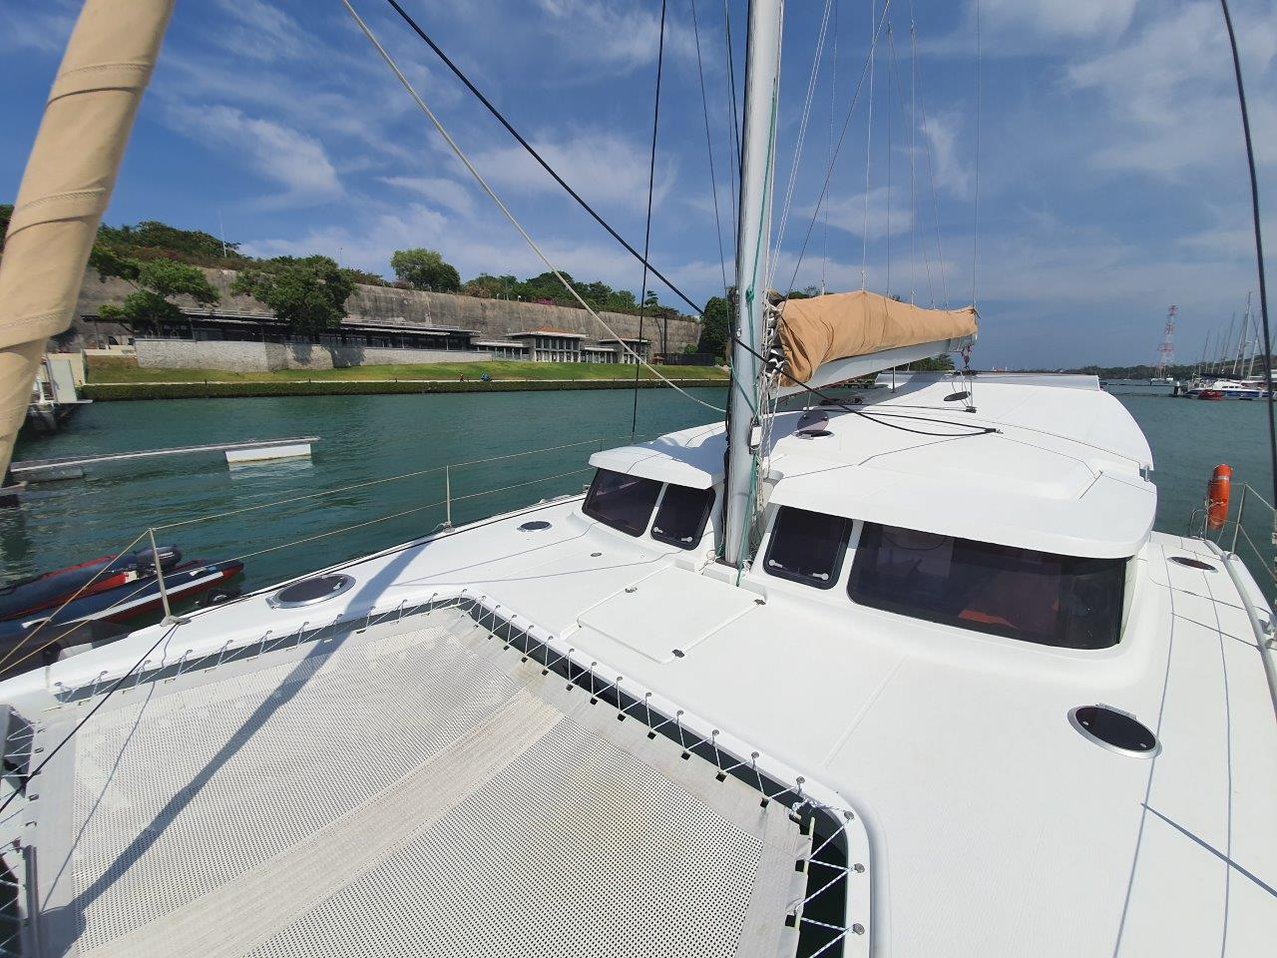 Mahe 36 - 3 cab. - Yacht Charter Queensland & Boat hire in Australia Queensland Whitsundays Coral Sea Marina 3